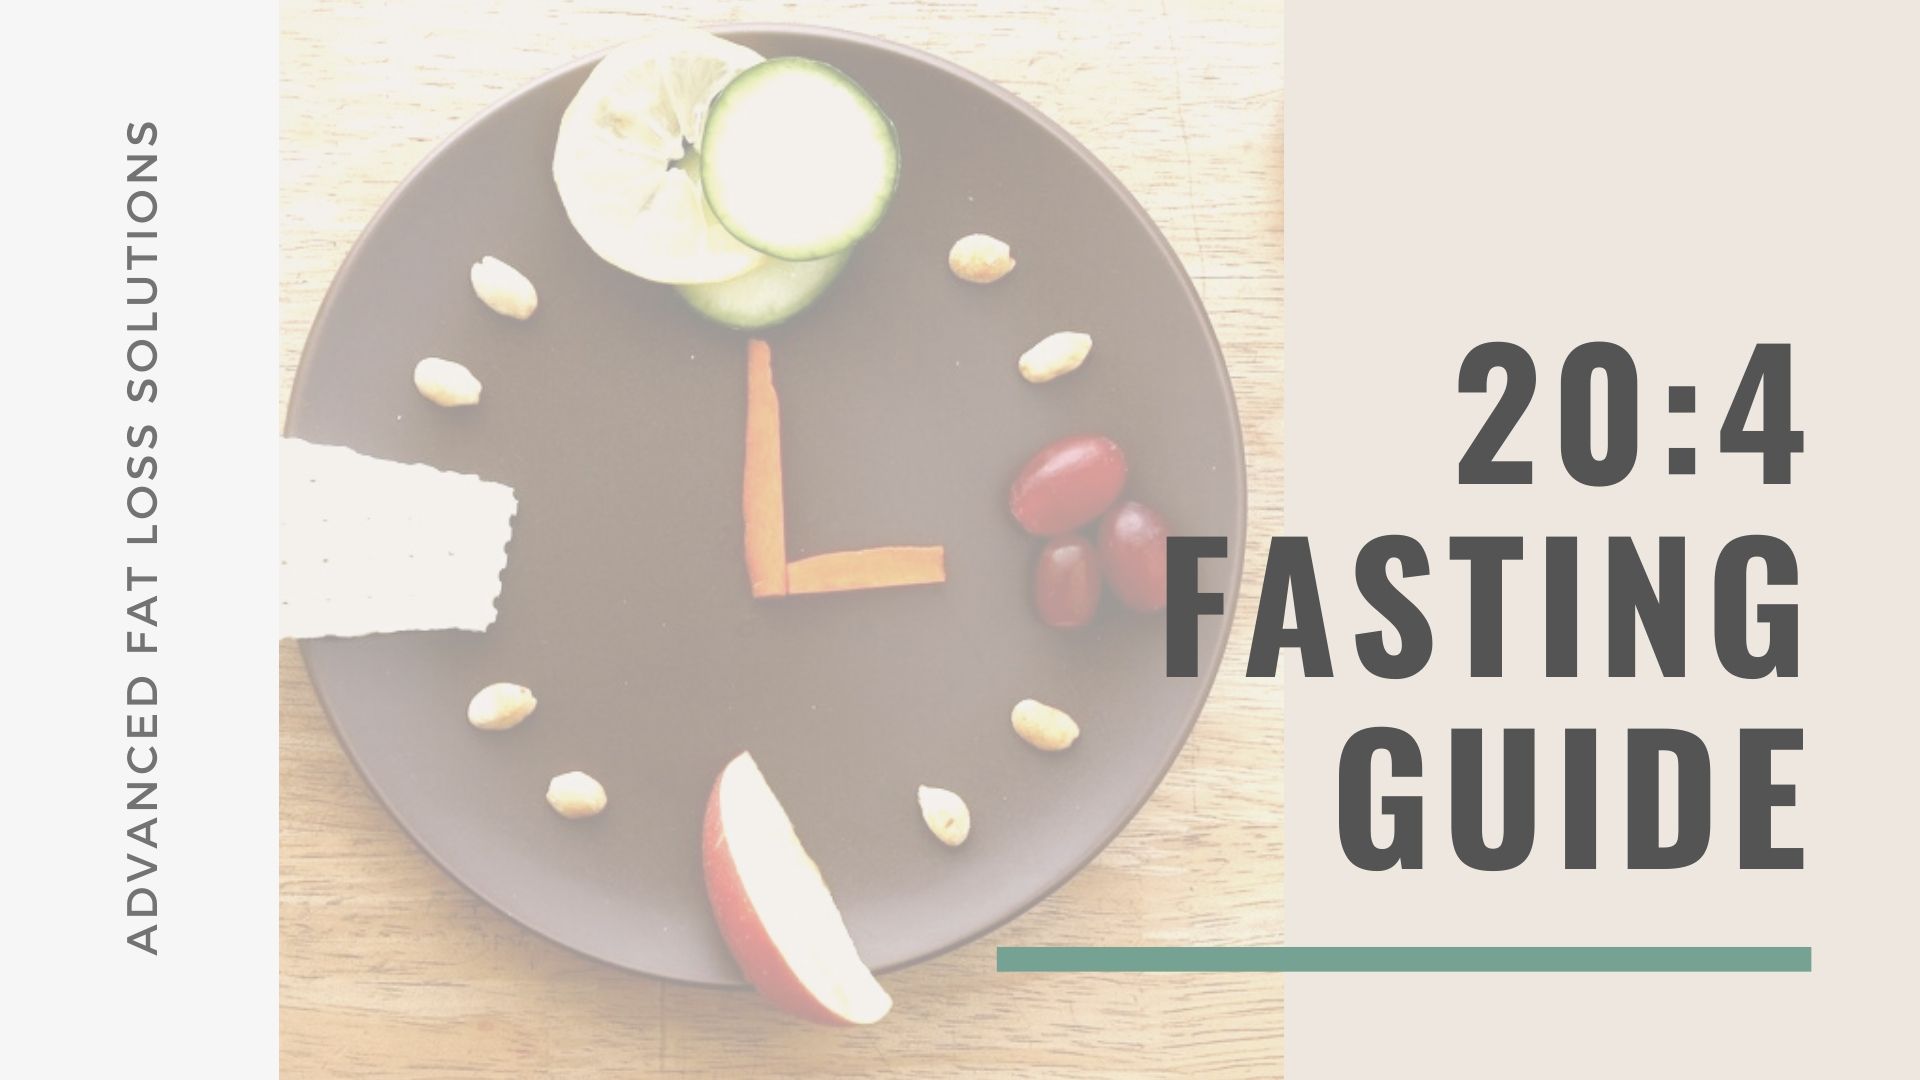 20:4 Fasting Guide